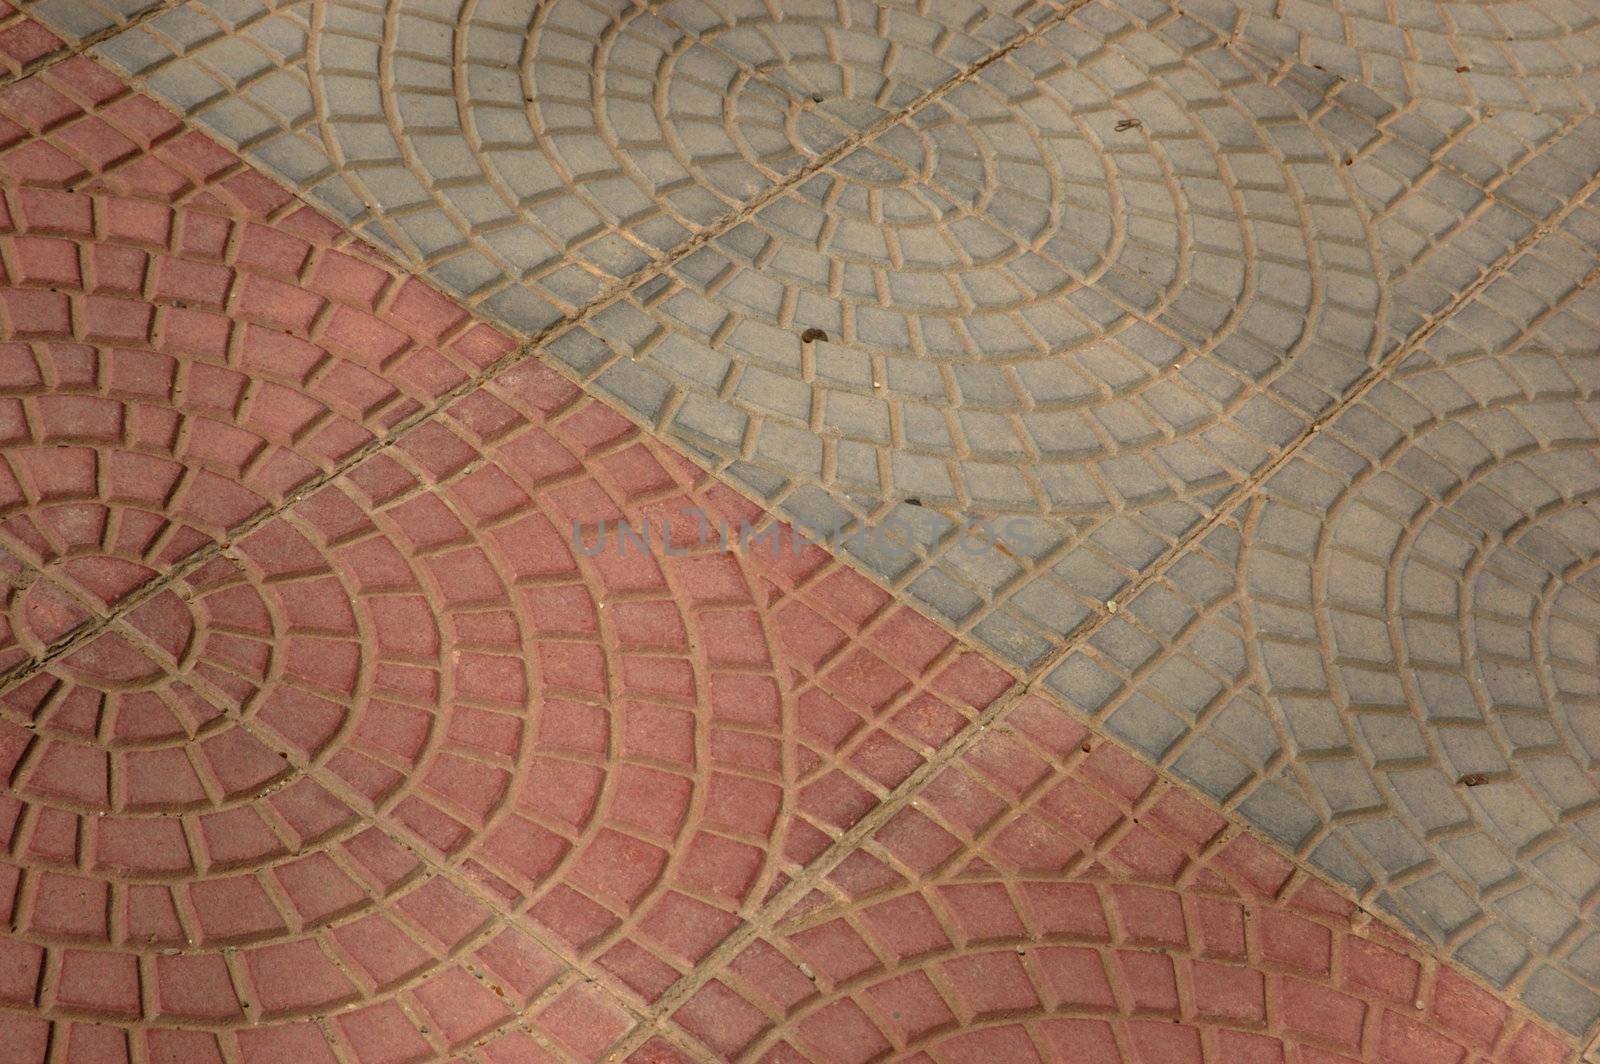 close-up of new old-style pavement of stoneblocks (bricks) of red color